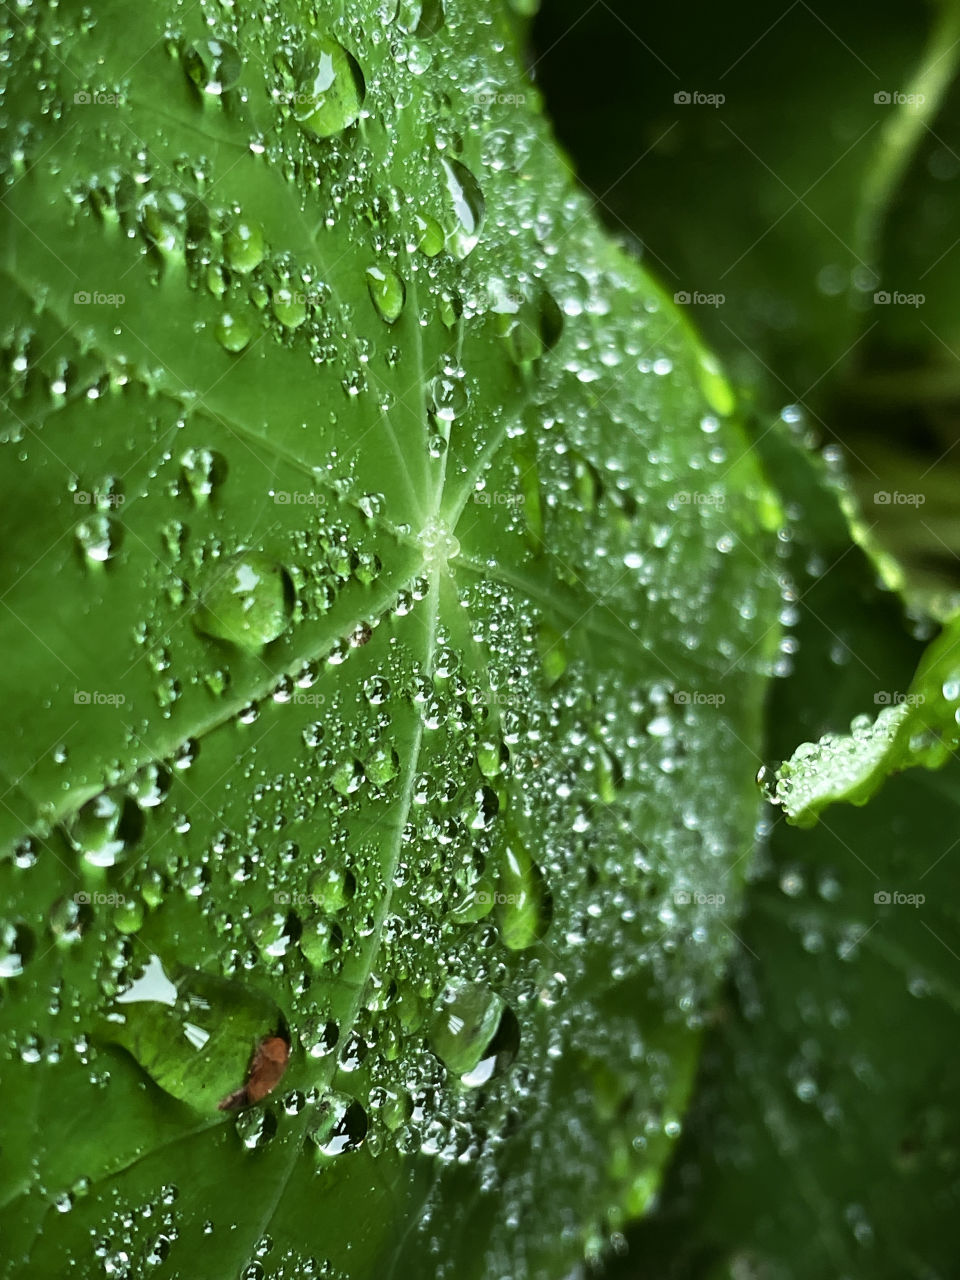 Water drops droplets water drops leaf green dew dewy raindrop dewdrop condensation tear shaped drop of water close up micro phone photo photography amateur plant Mother Nature wetness dampness morning dew rain moisture rainfall precipitation contrast